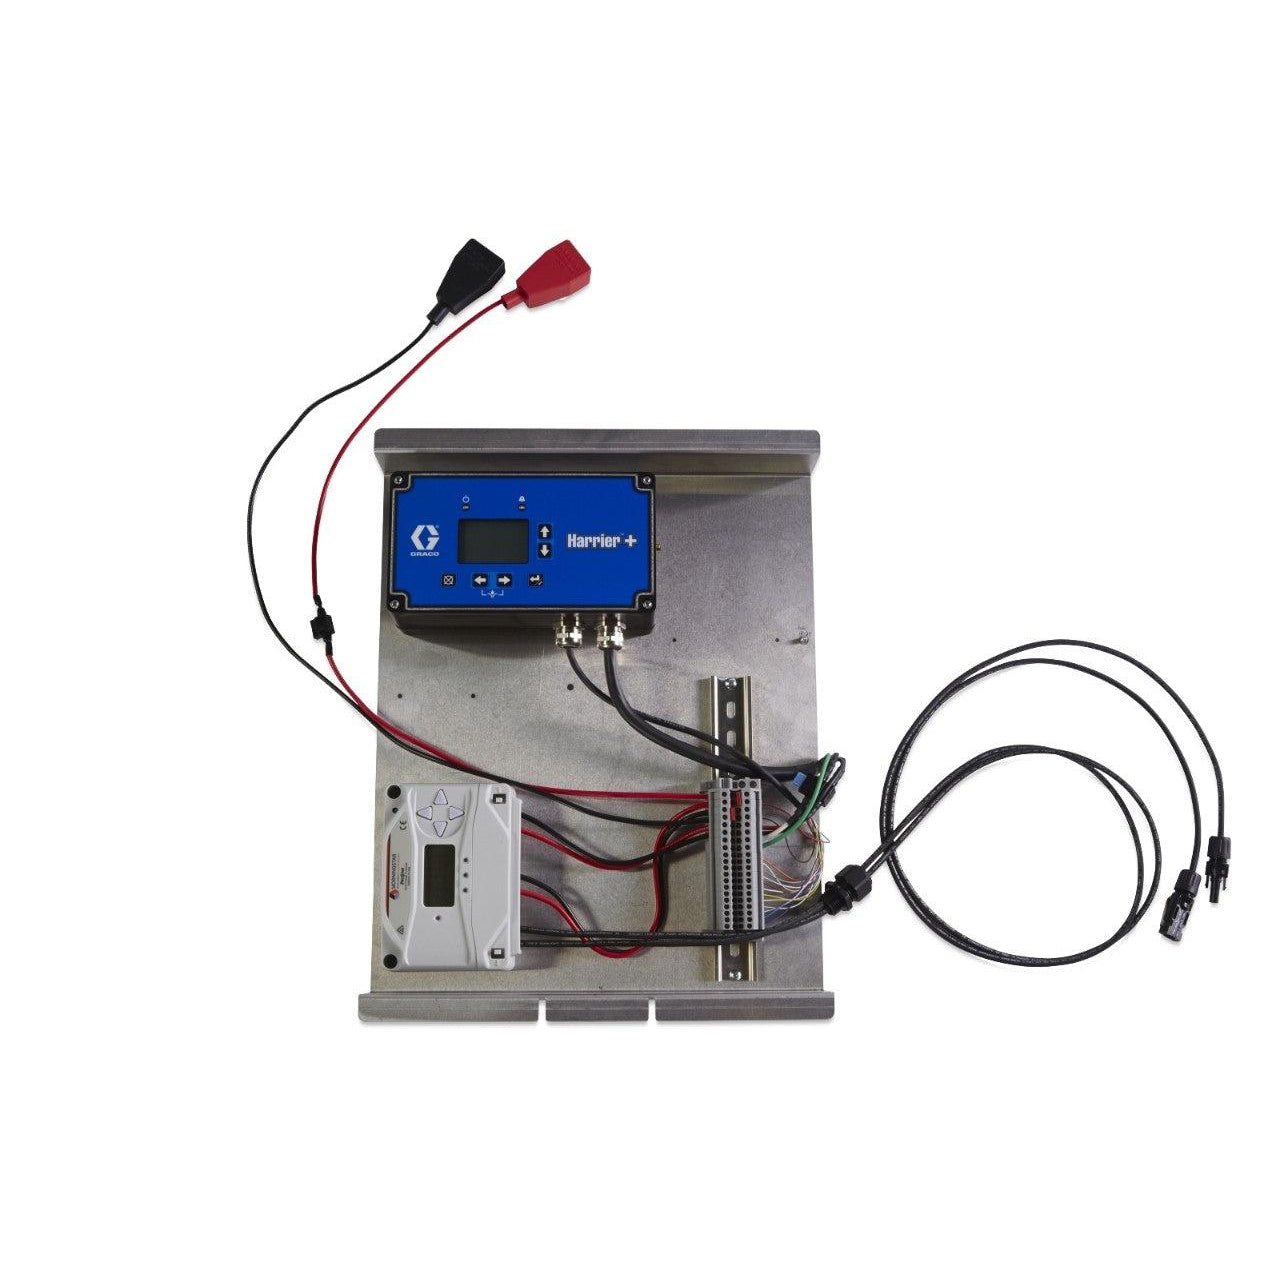 Four-Battery Control Box with Harrier+ International Controller and Includes Prostar 30 Two Panel Charge Controller